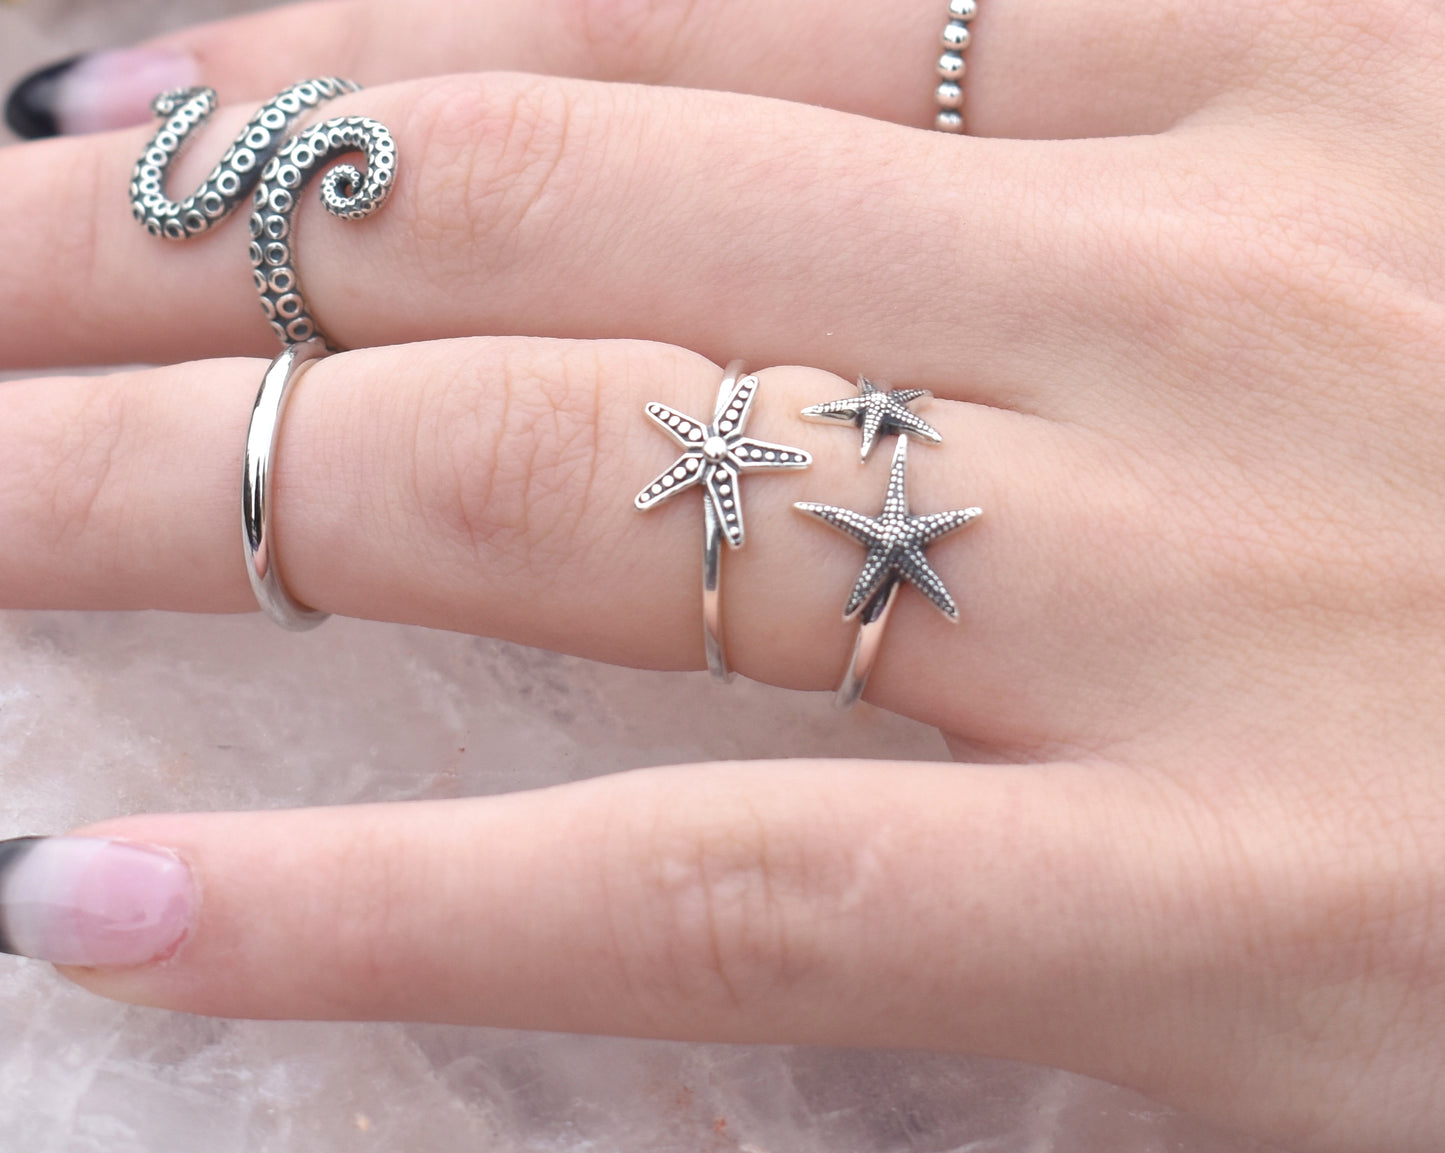 Double Open Starfish Beach Ring-Sterling Silver